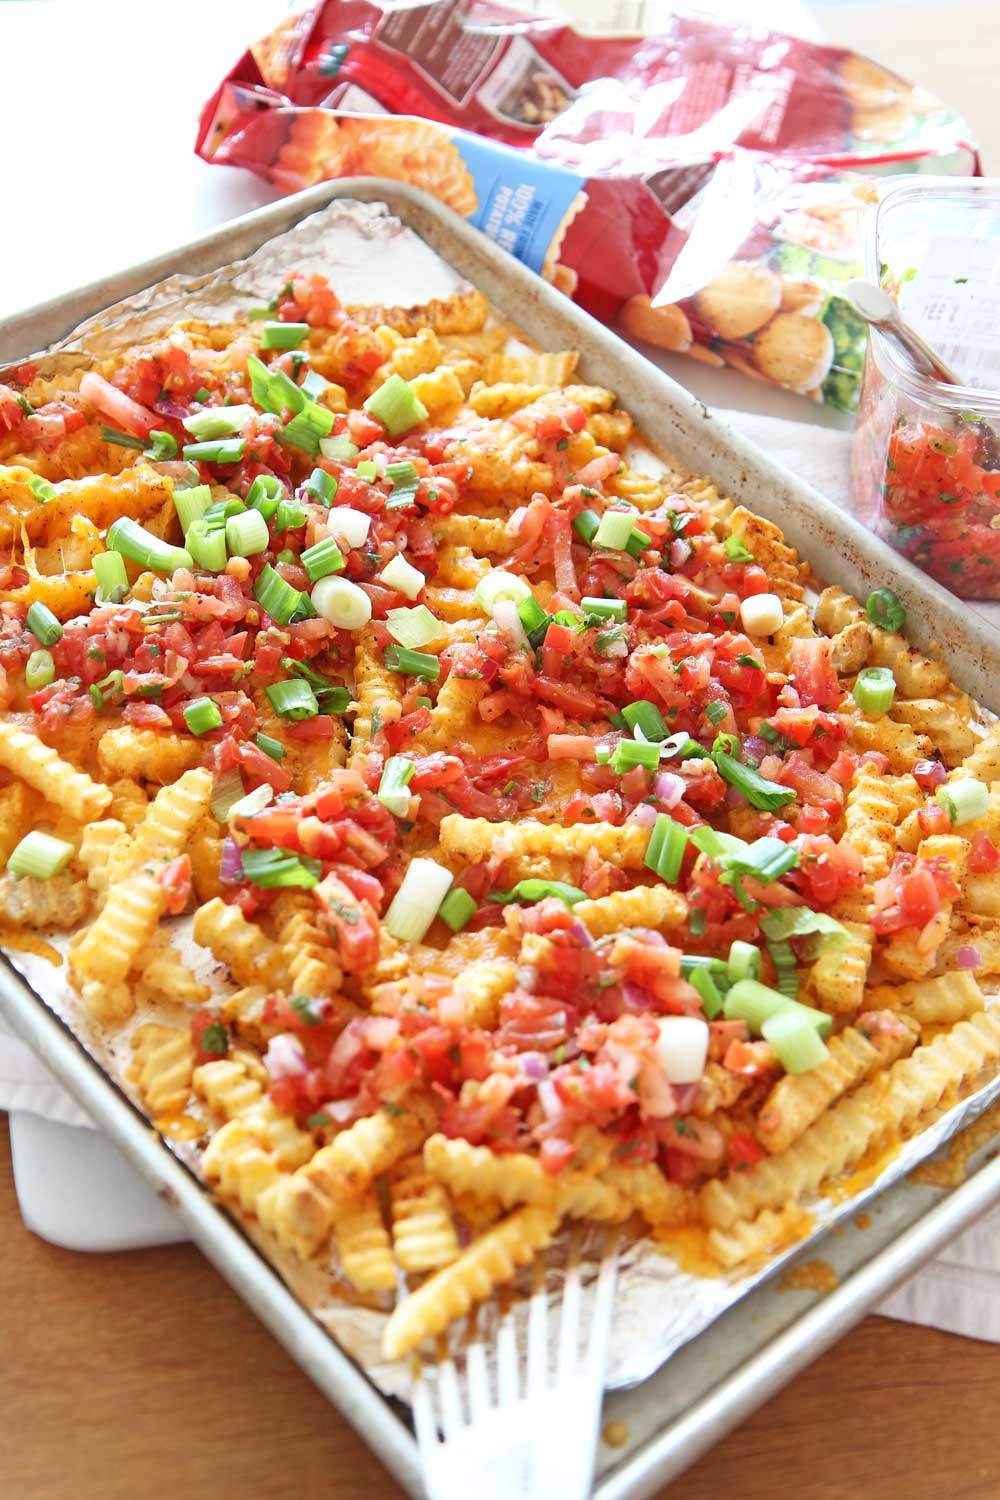 How to Transform Frozen Fries Into Loaded Taco Fries Recipe. Frozen fries, salsa, scallions, cheese, and chili seasoning. Transforming frozen fries is as easy as pantry seasonings cheese, and an oven. Happy sheet pan cooking! www.ChopHappy.com #frozenfries #tacos #pantry 